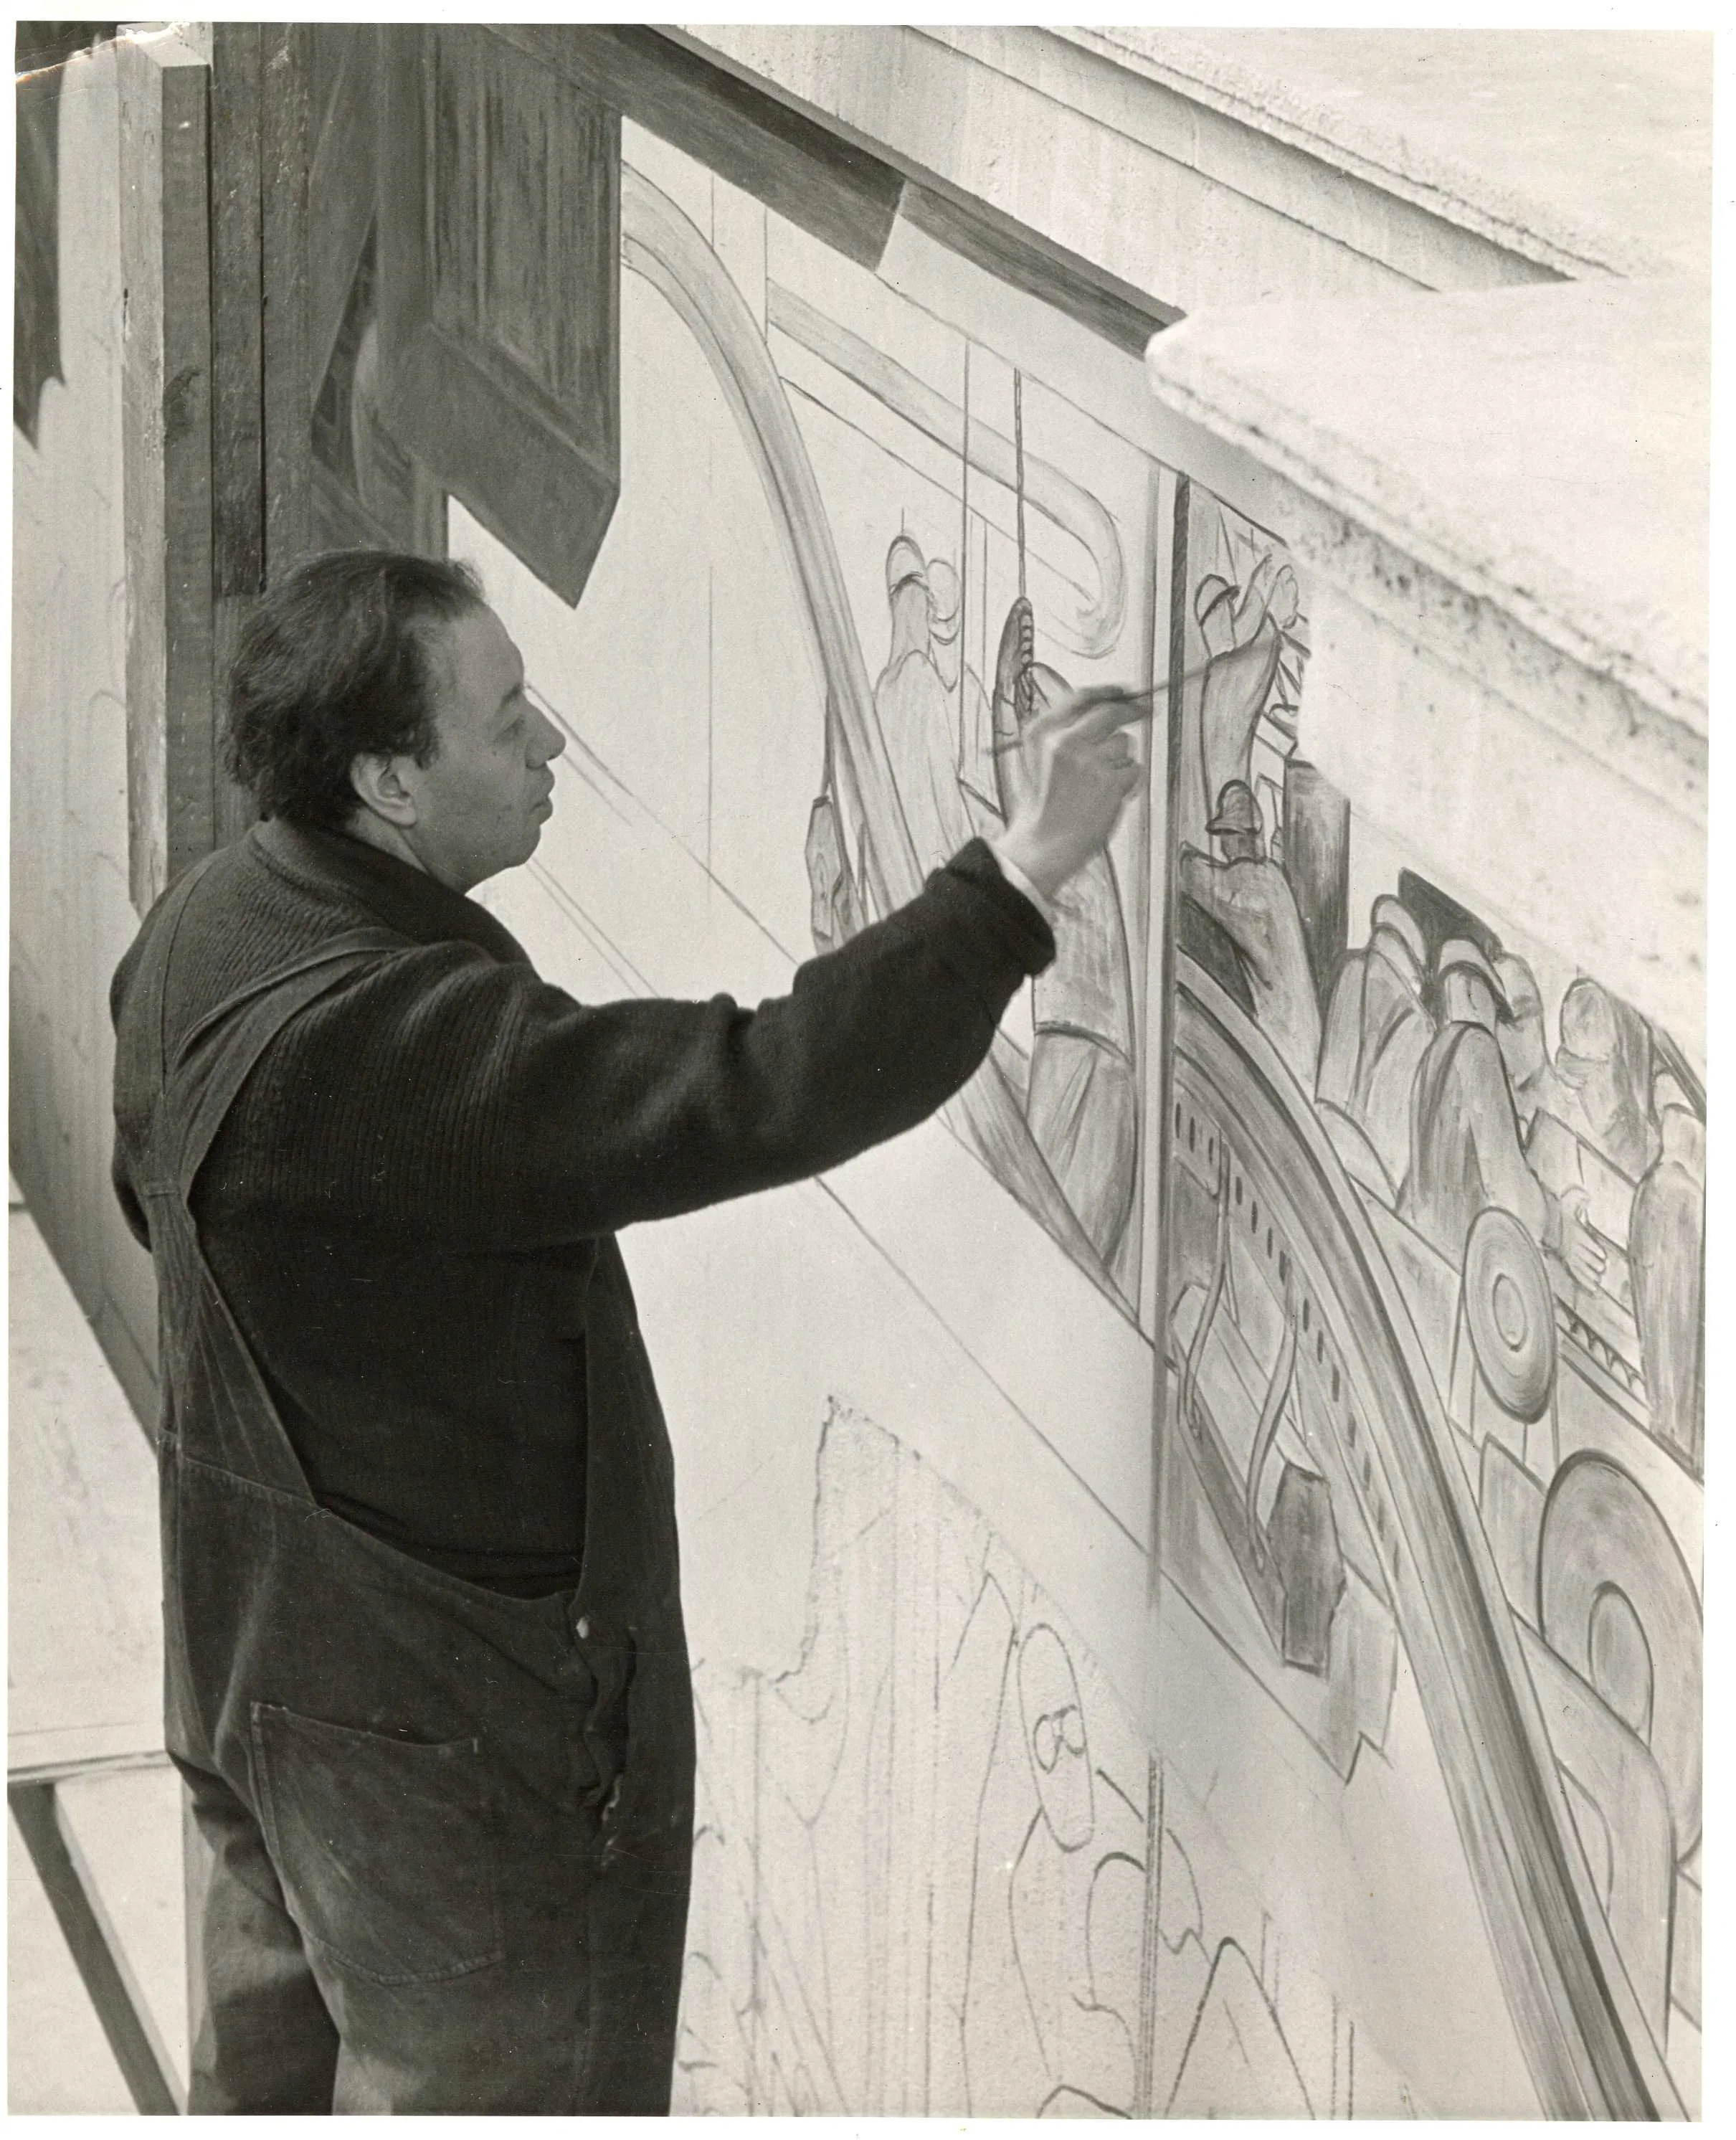 Rivera painting Detroit Industry Murals, ca.1932, Photographic Collection, Detroit Institute of Arts, Research Library & Archives